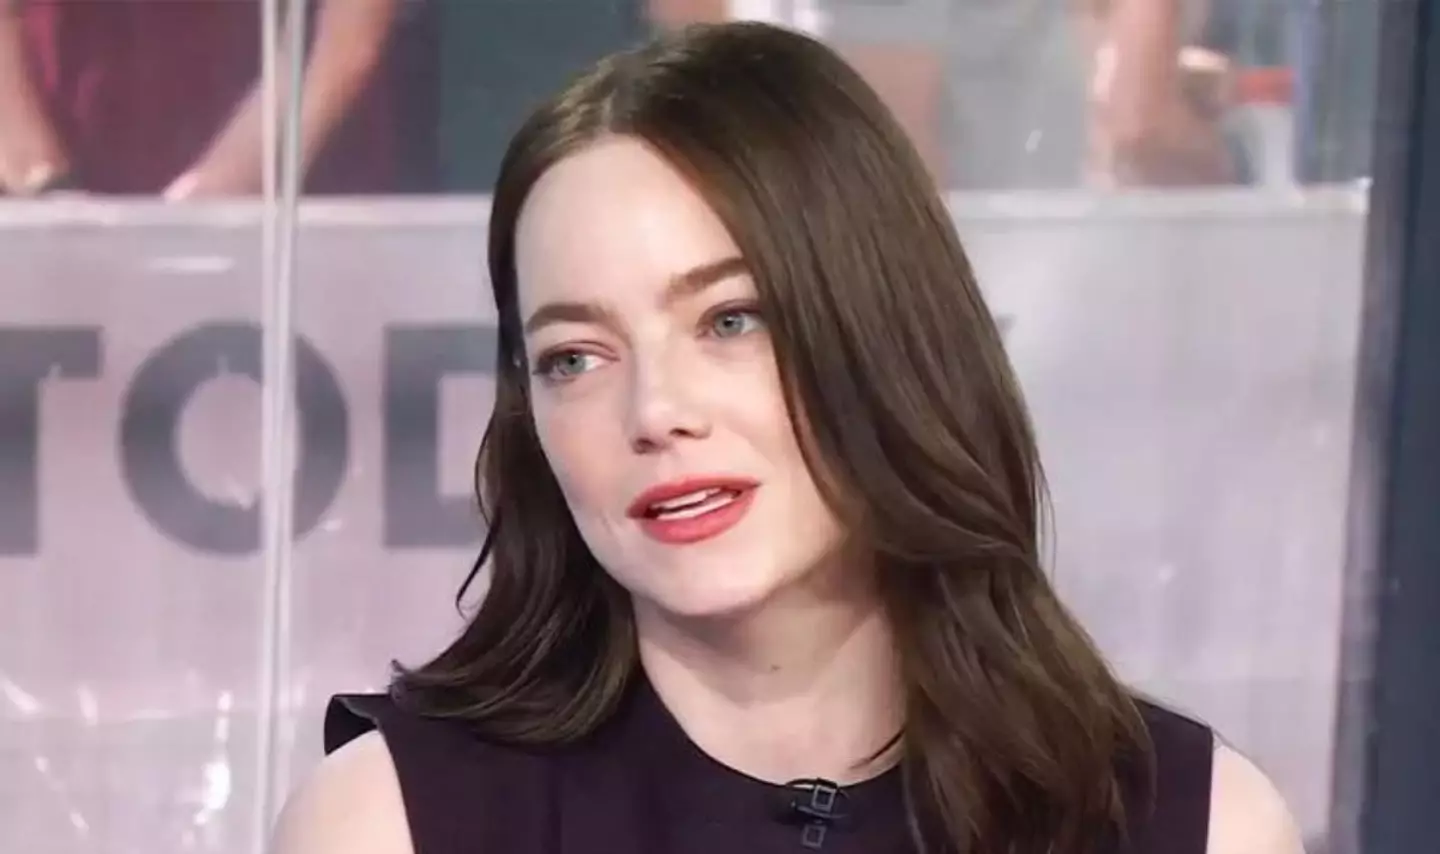 Emma Stone said she was 'fine either way' with fans calling her 'Emma' or 'Emily'. (Today/NBC)